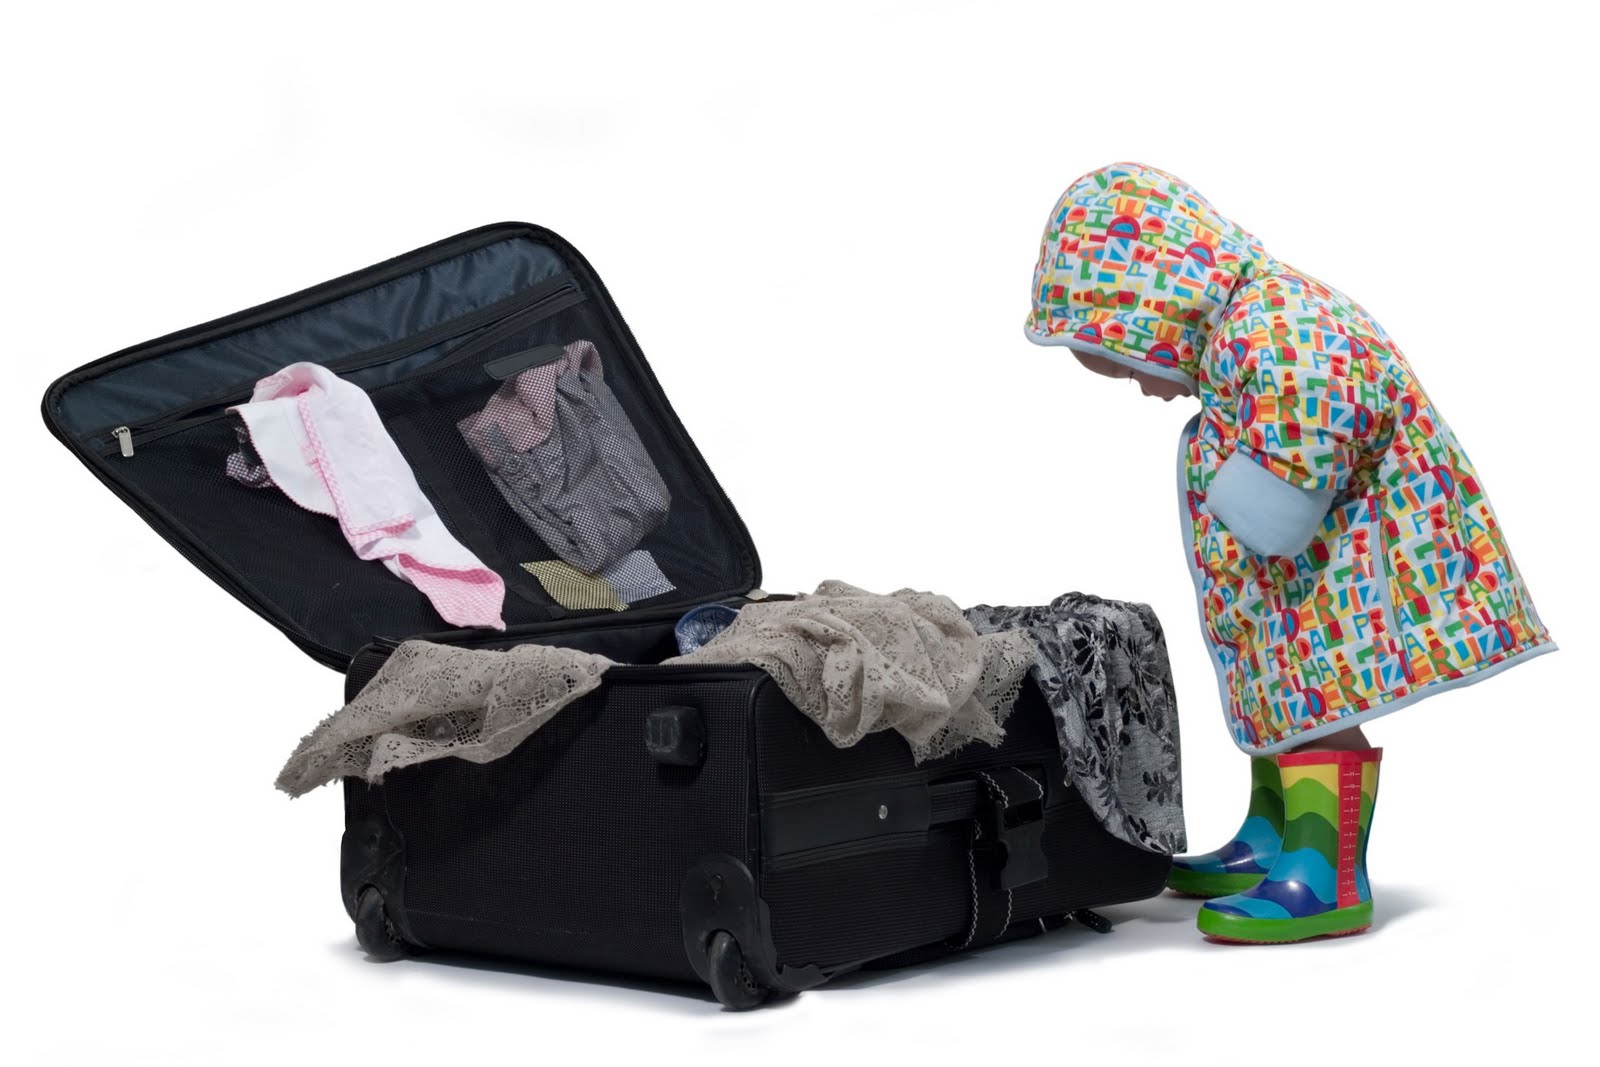 Some Suitcases and Best Quality Bags for Packing the Kids Luggage to Travel Abroad – We People ...